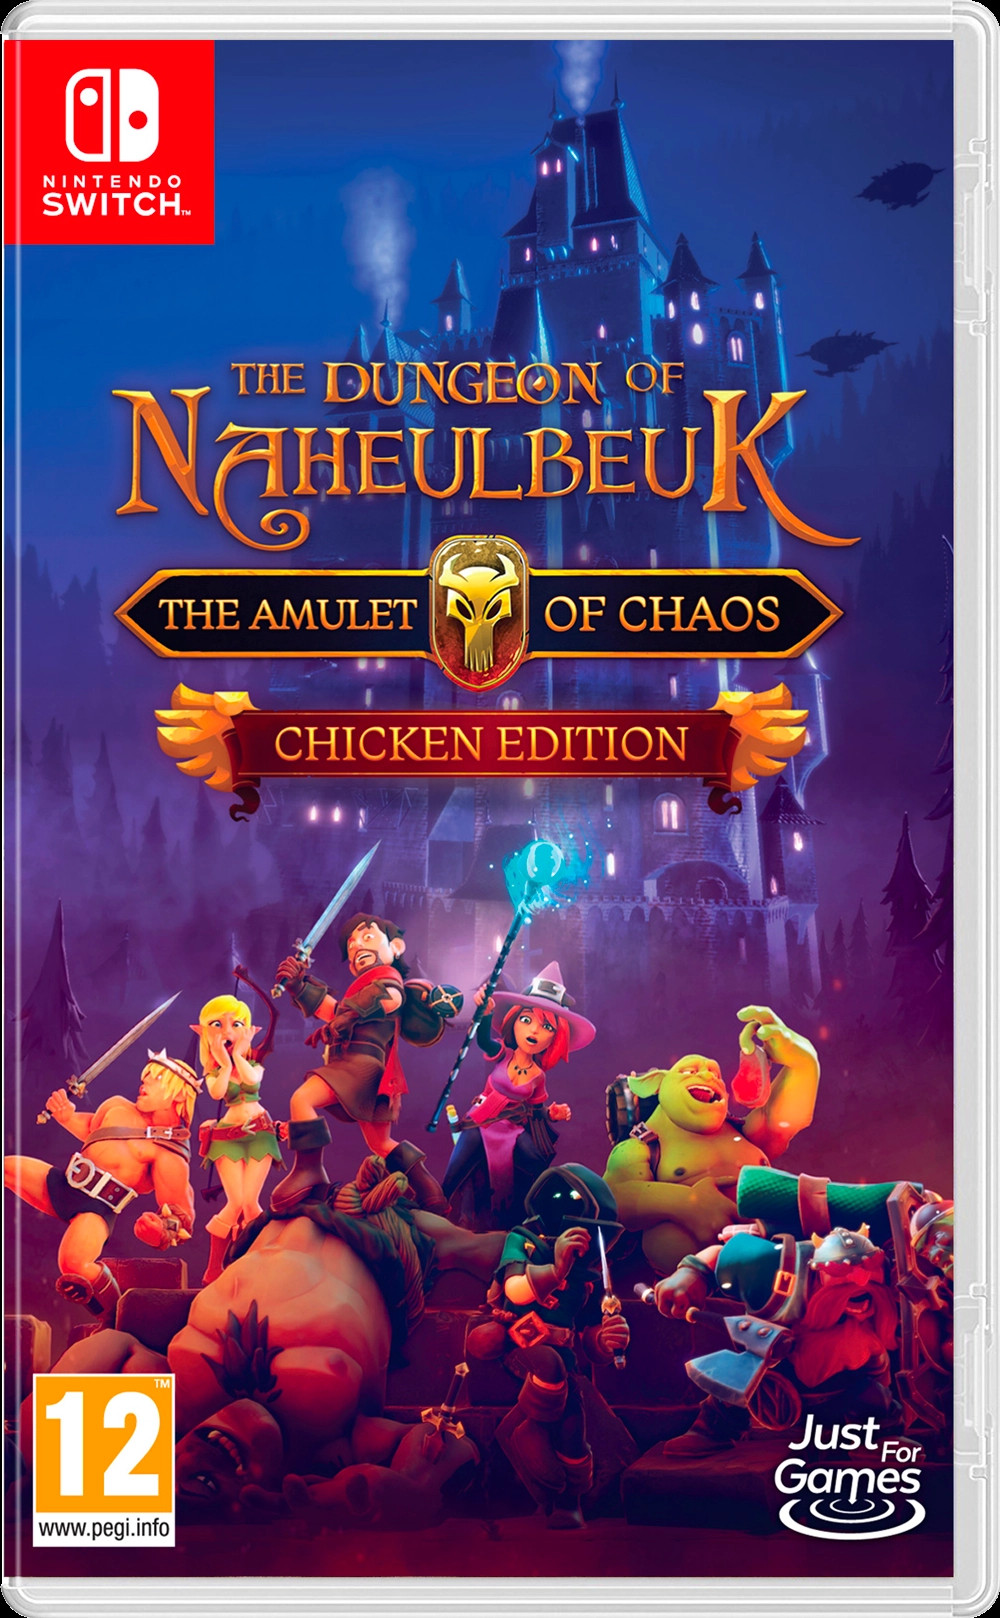 The Dungeon Of Naheulbeuk: The Amulet Of Chaos - Chicken Edition - Nintendo Switch